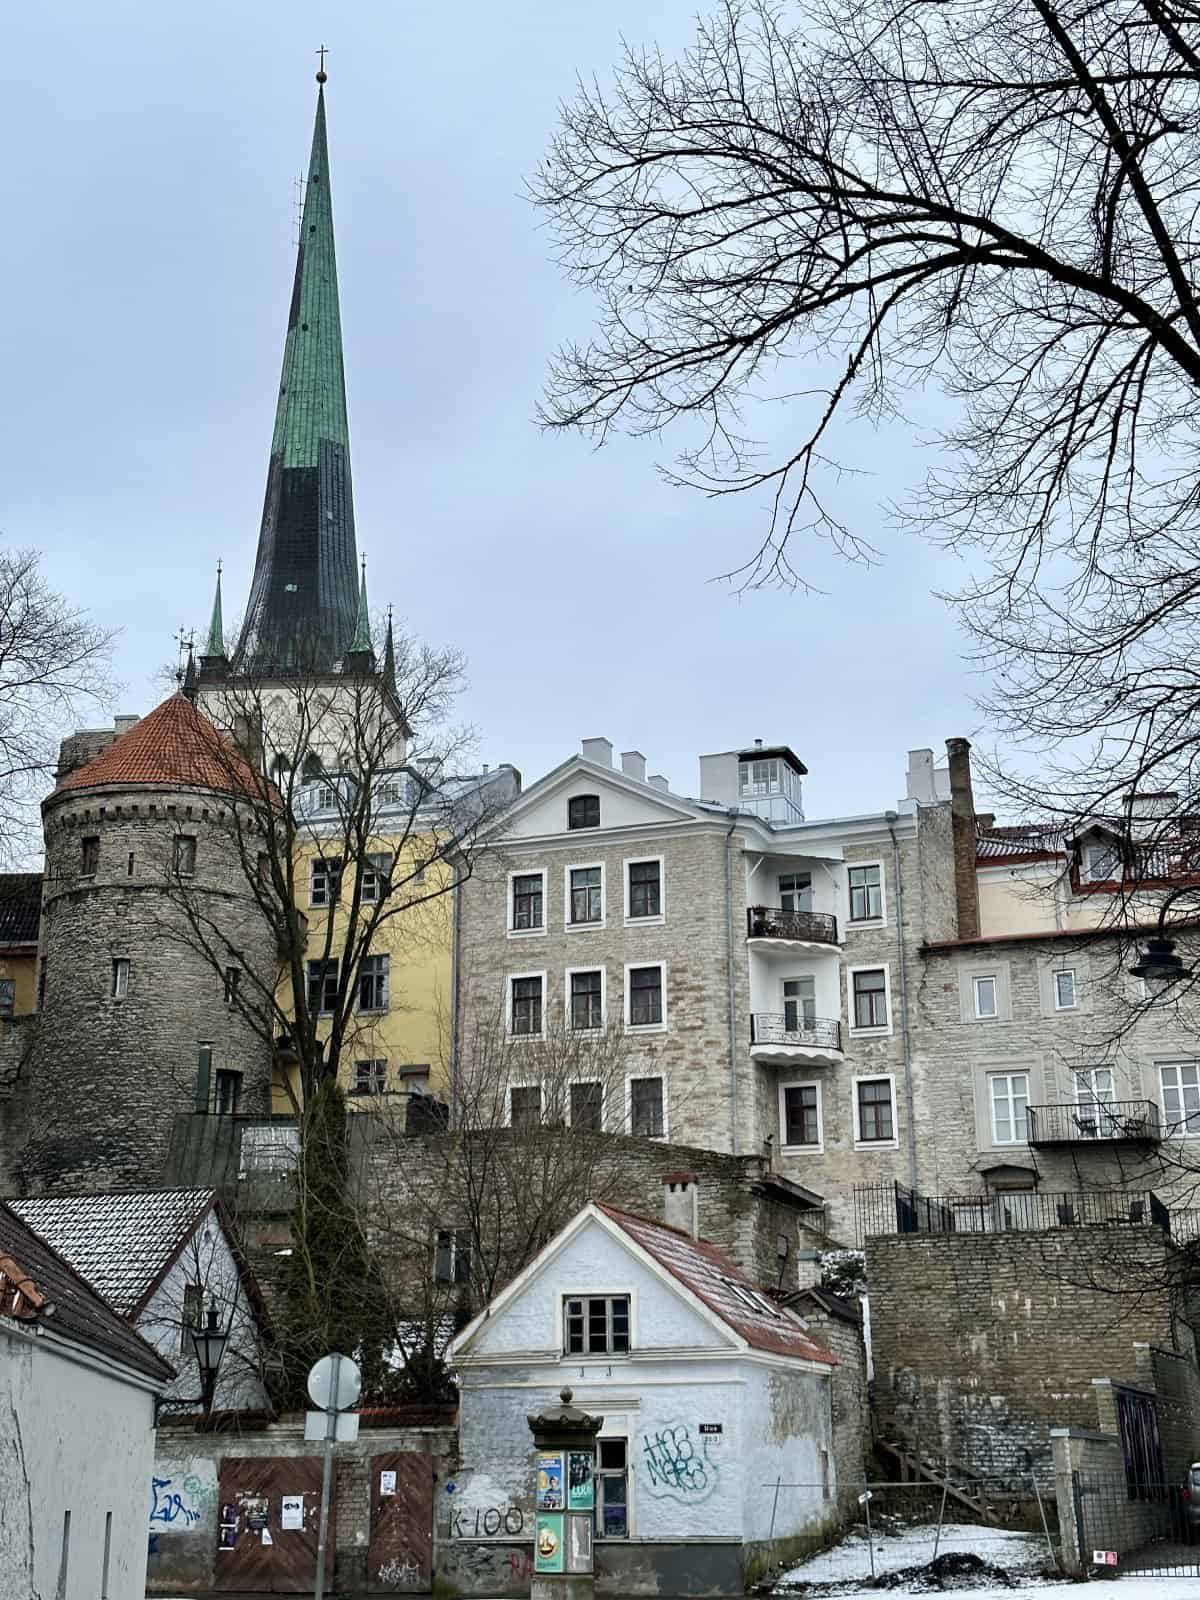 A Day in Tallinn, Estonia | entrance to Old Town